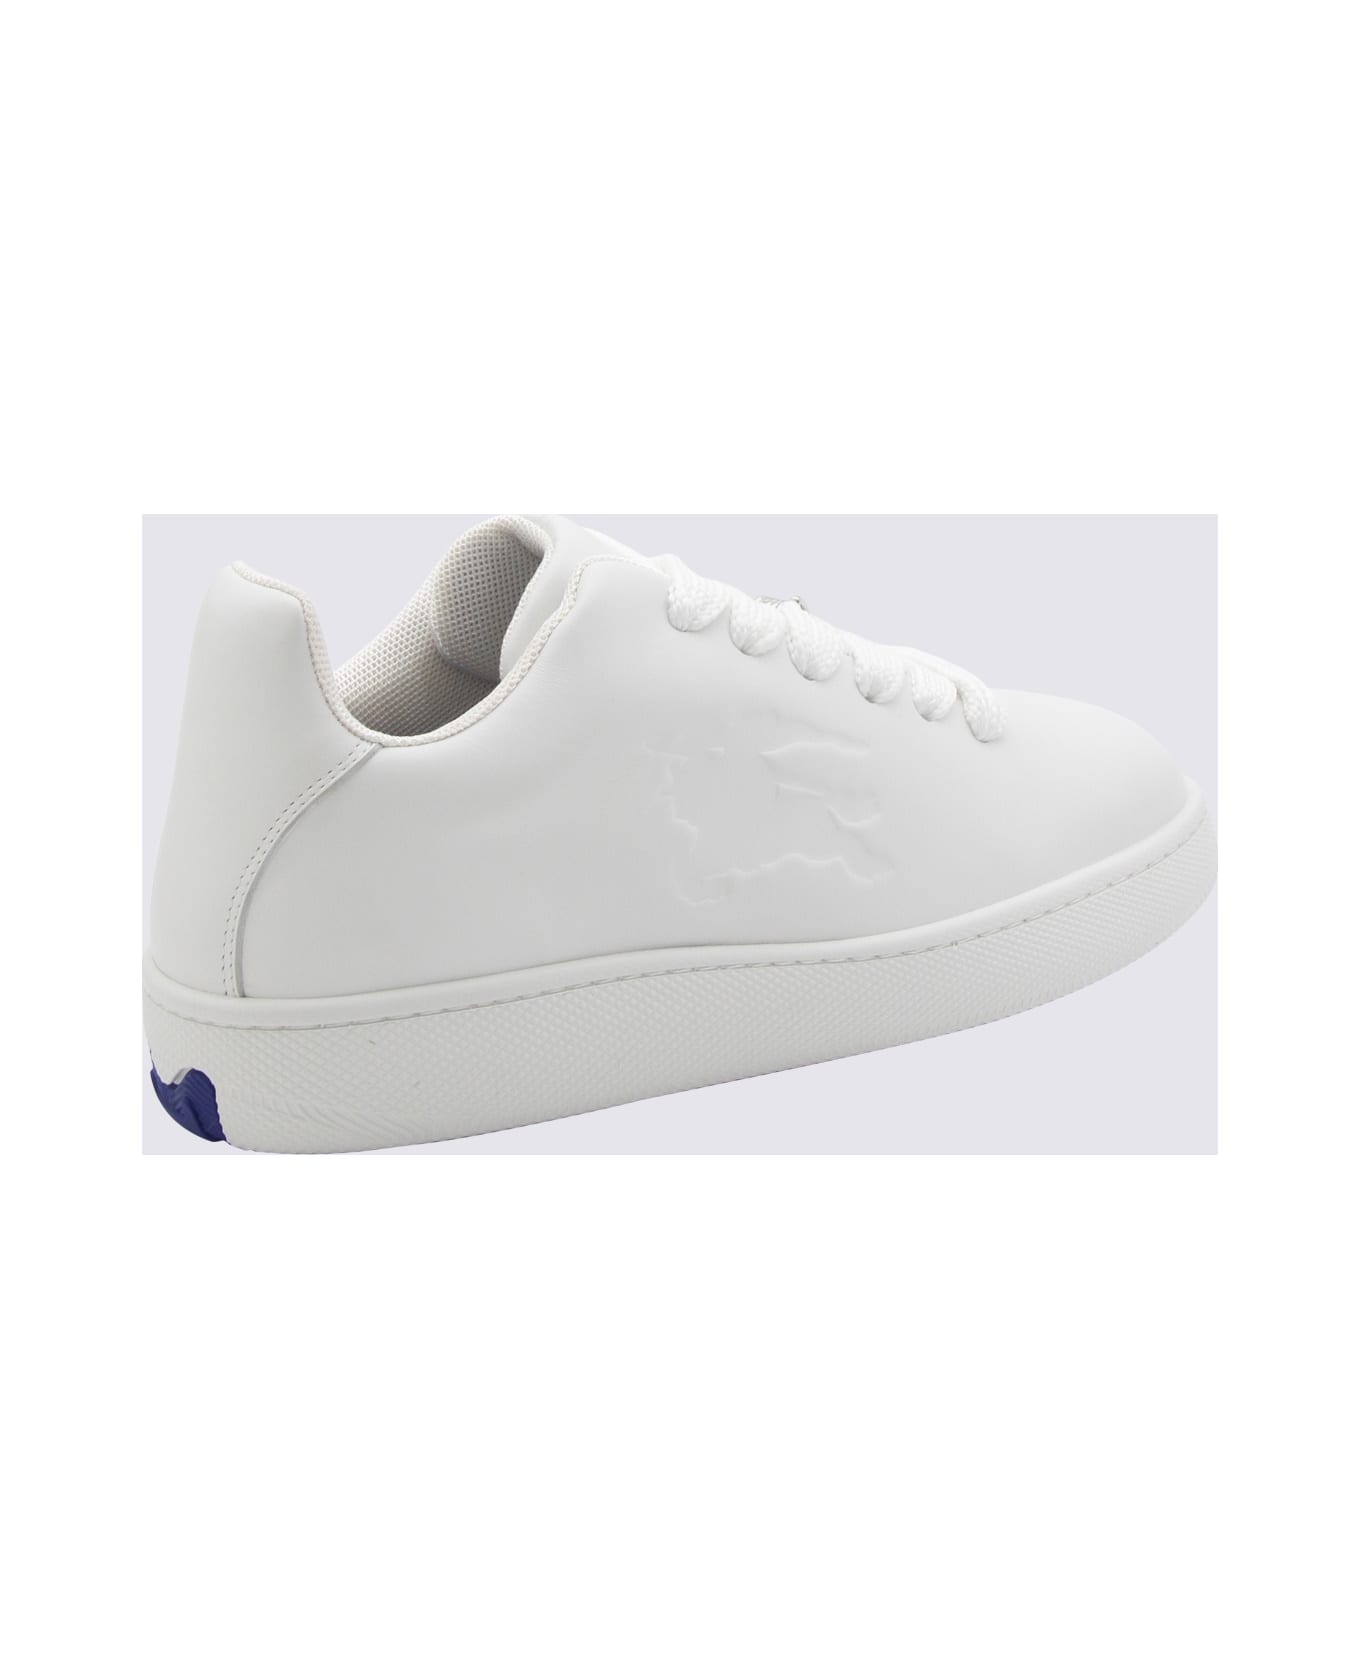 Burberry White Leather Sneakers - White